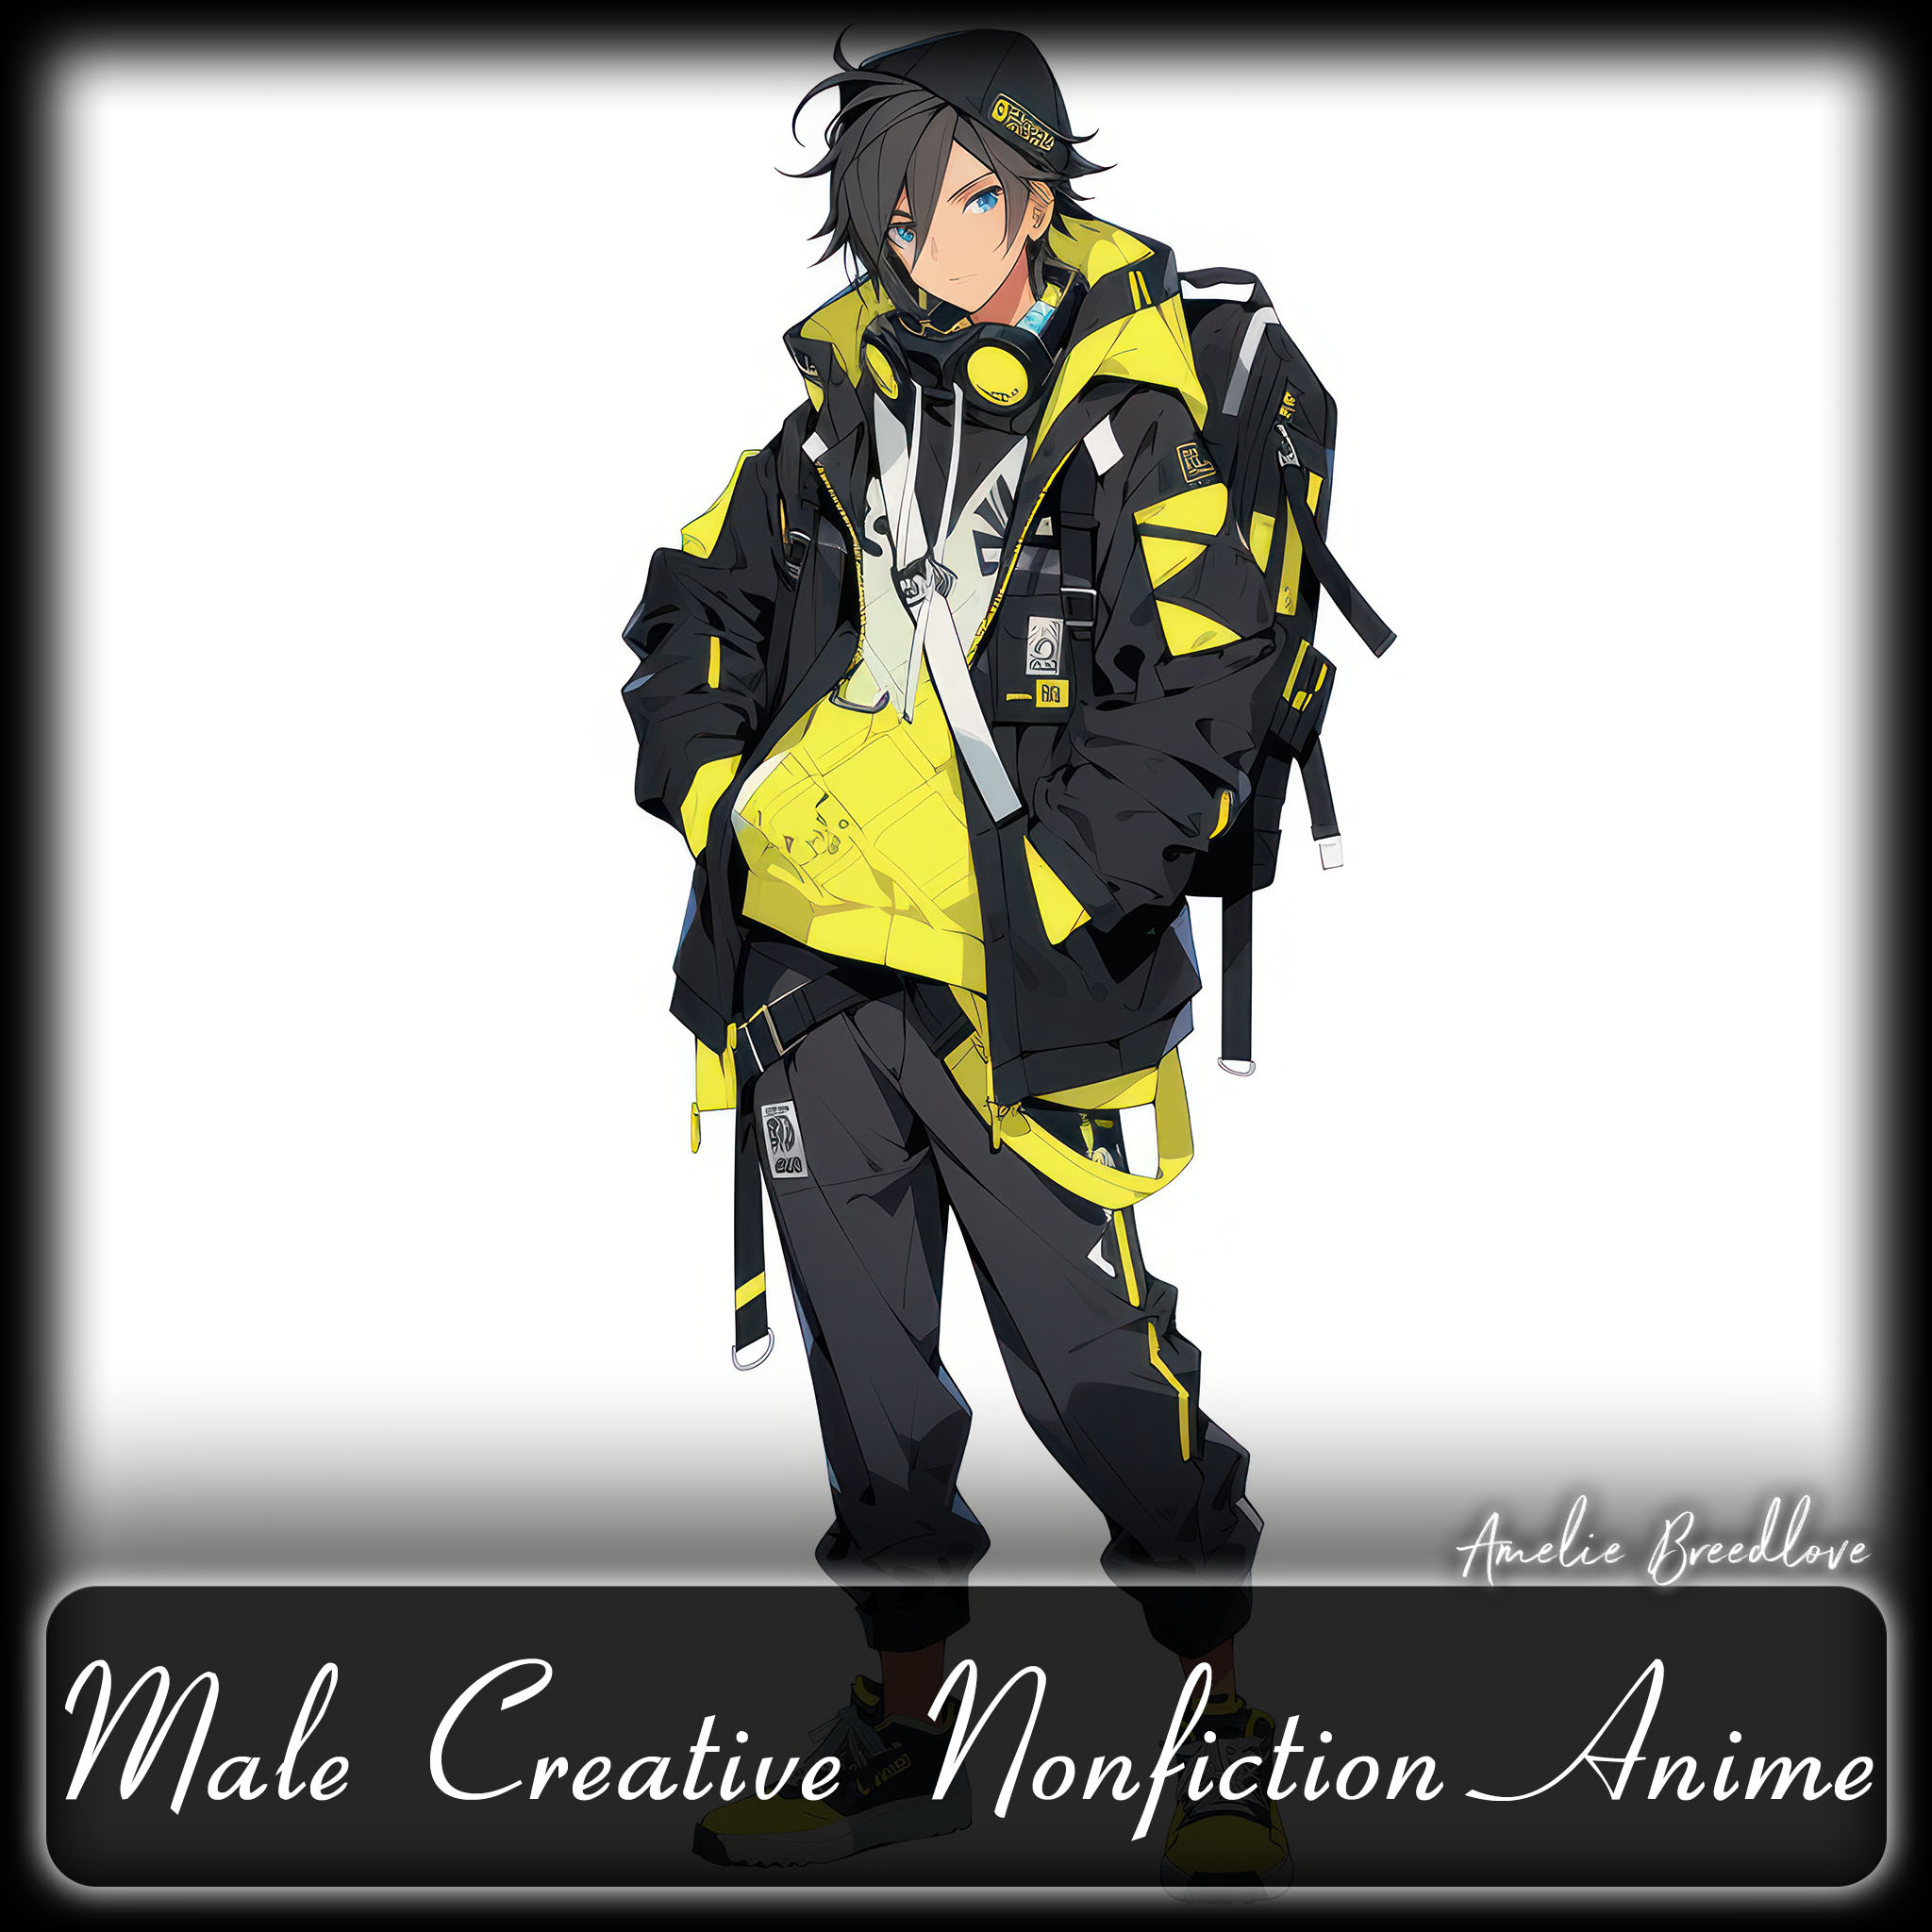 Download Gacha Life Anime Outfits Ideas APK v1.0.0 For Android